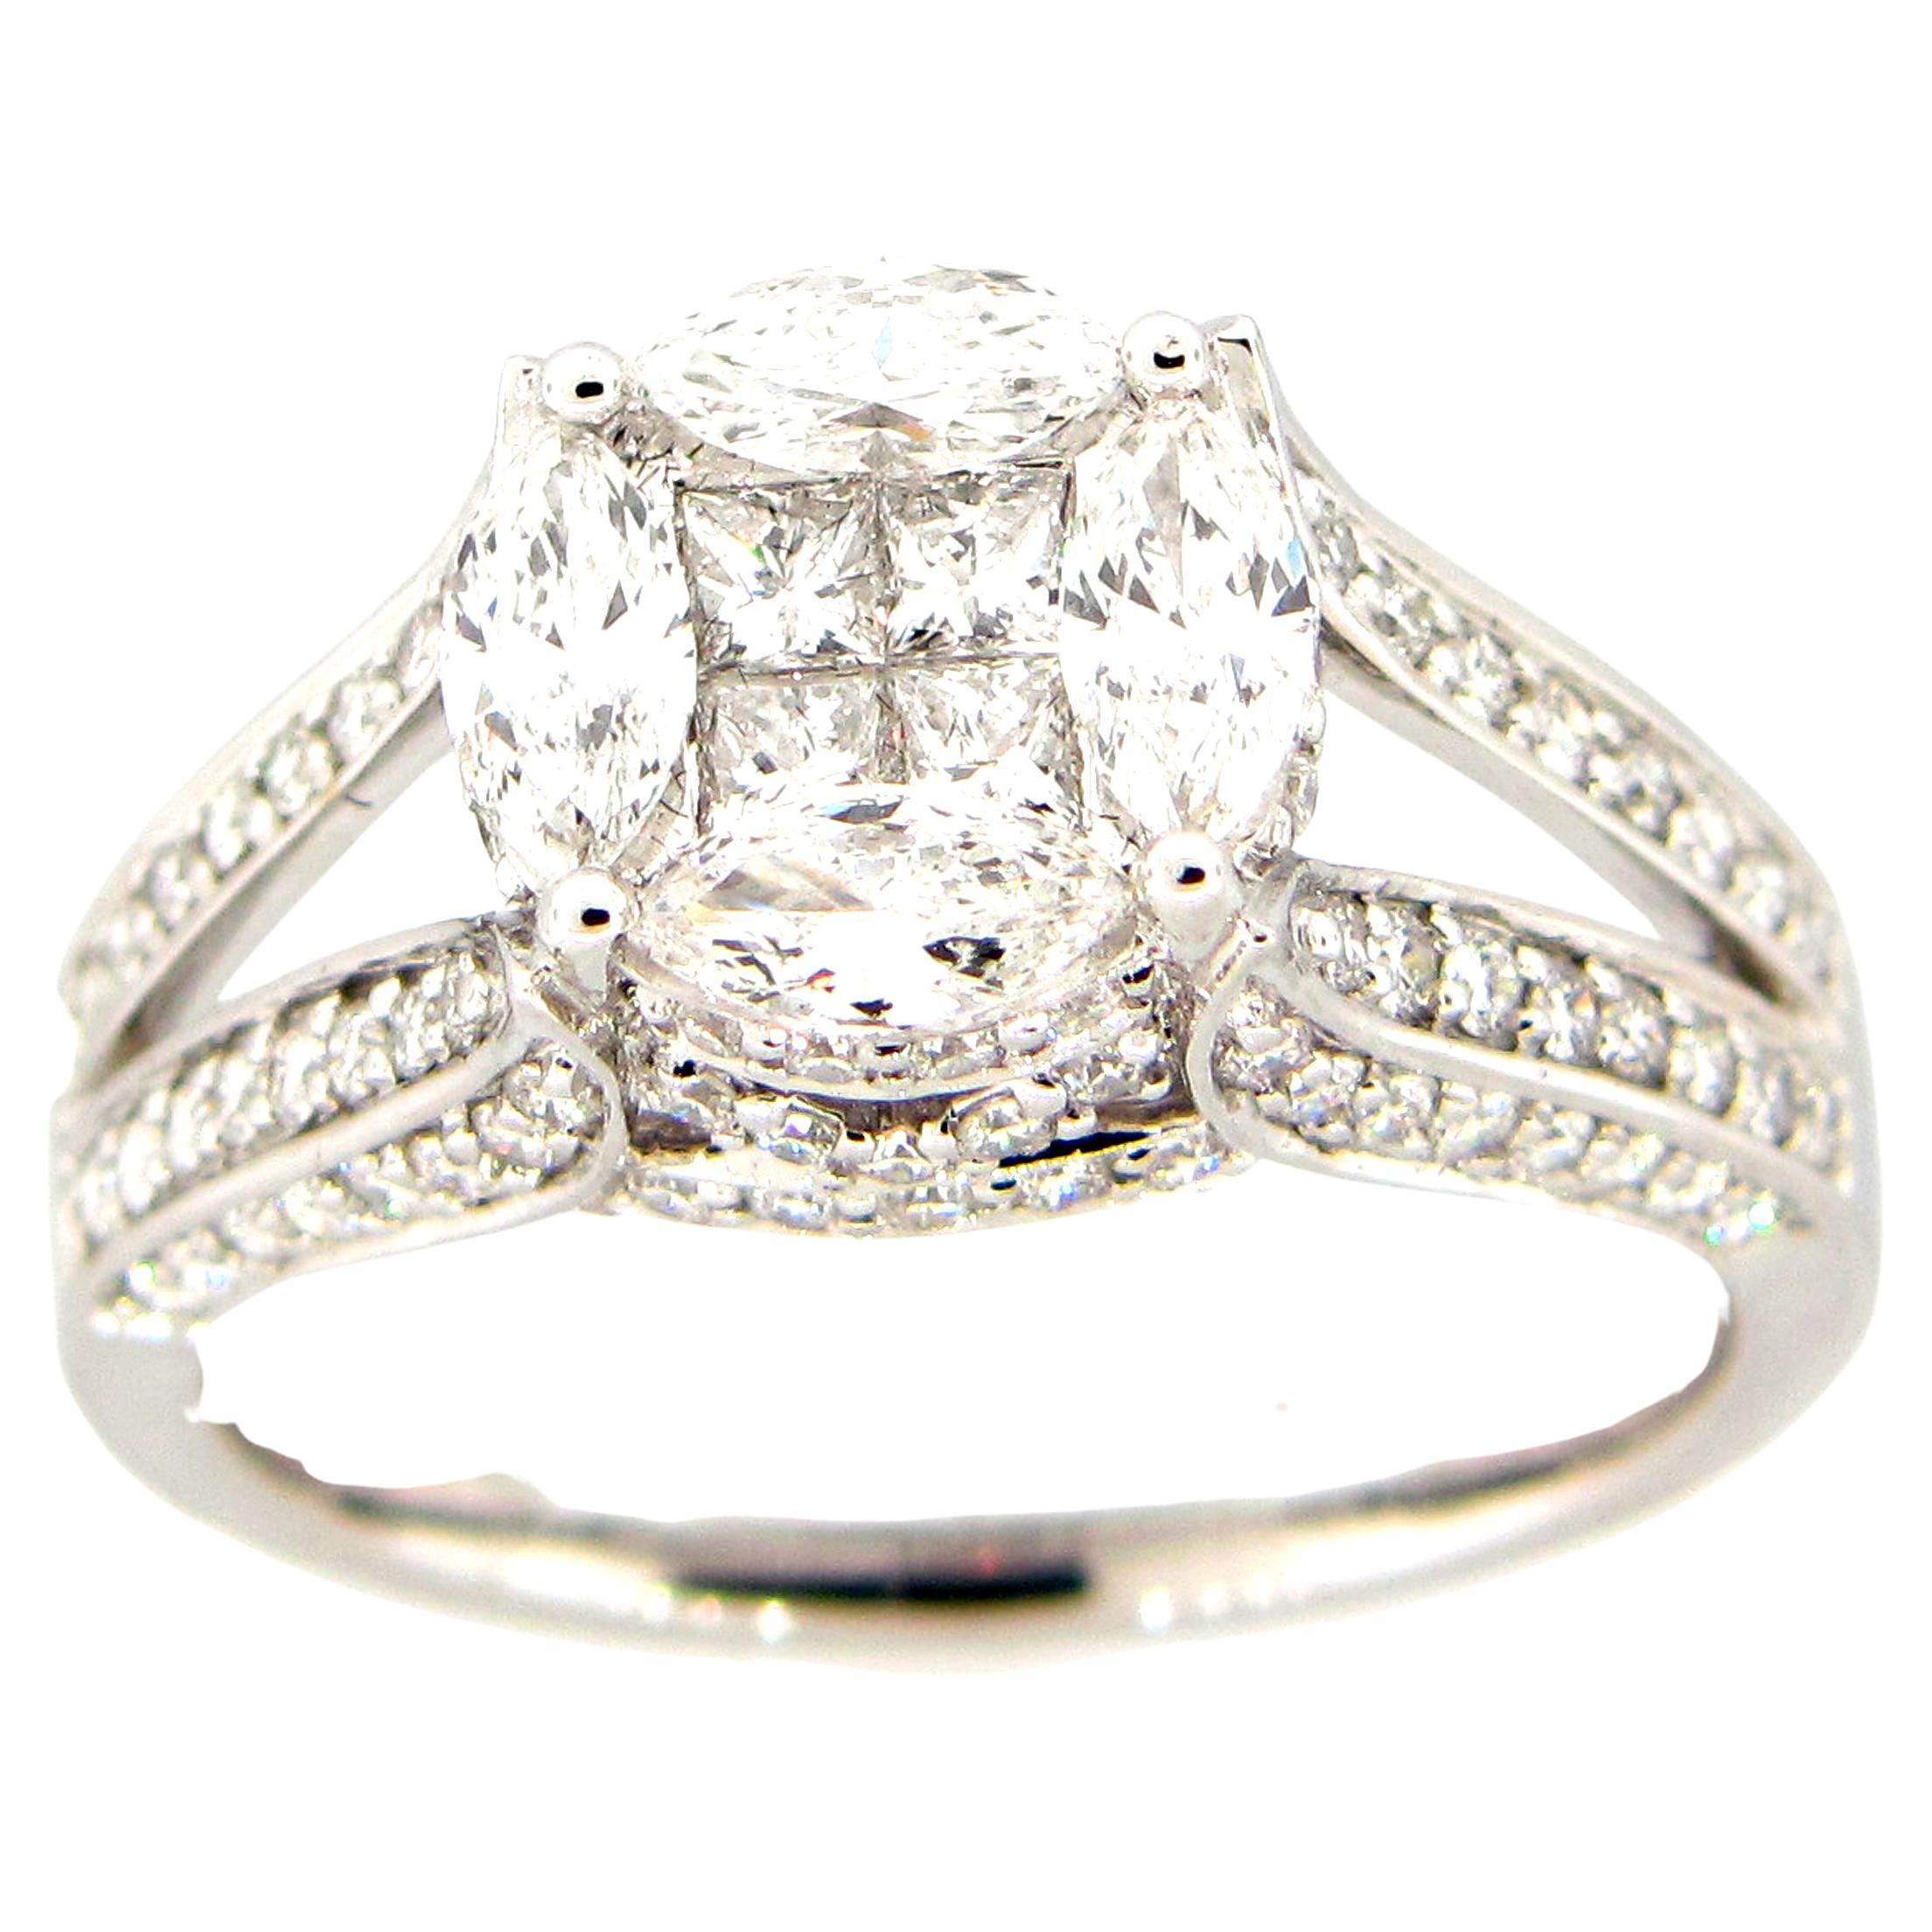 1.49 Carat Round Diamond Cluster Ring For Sale